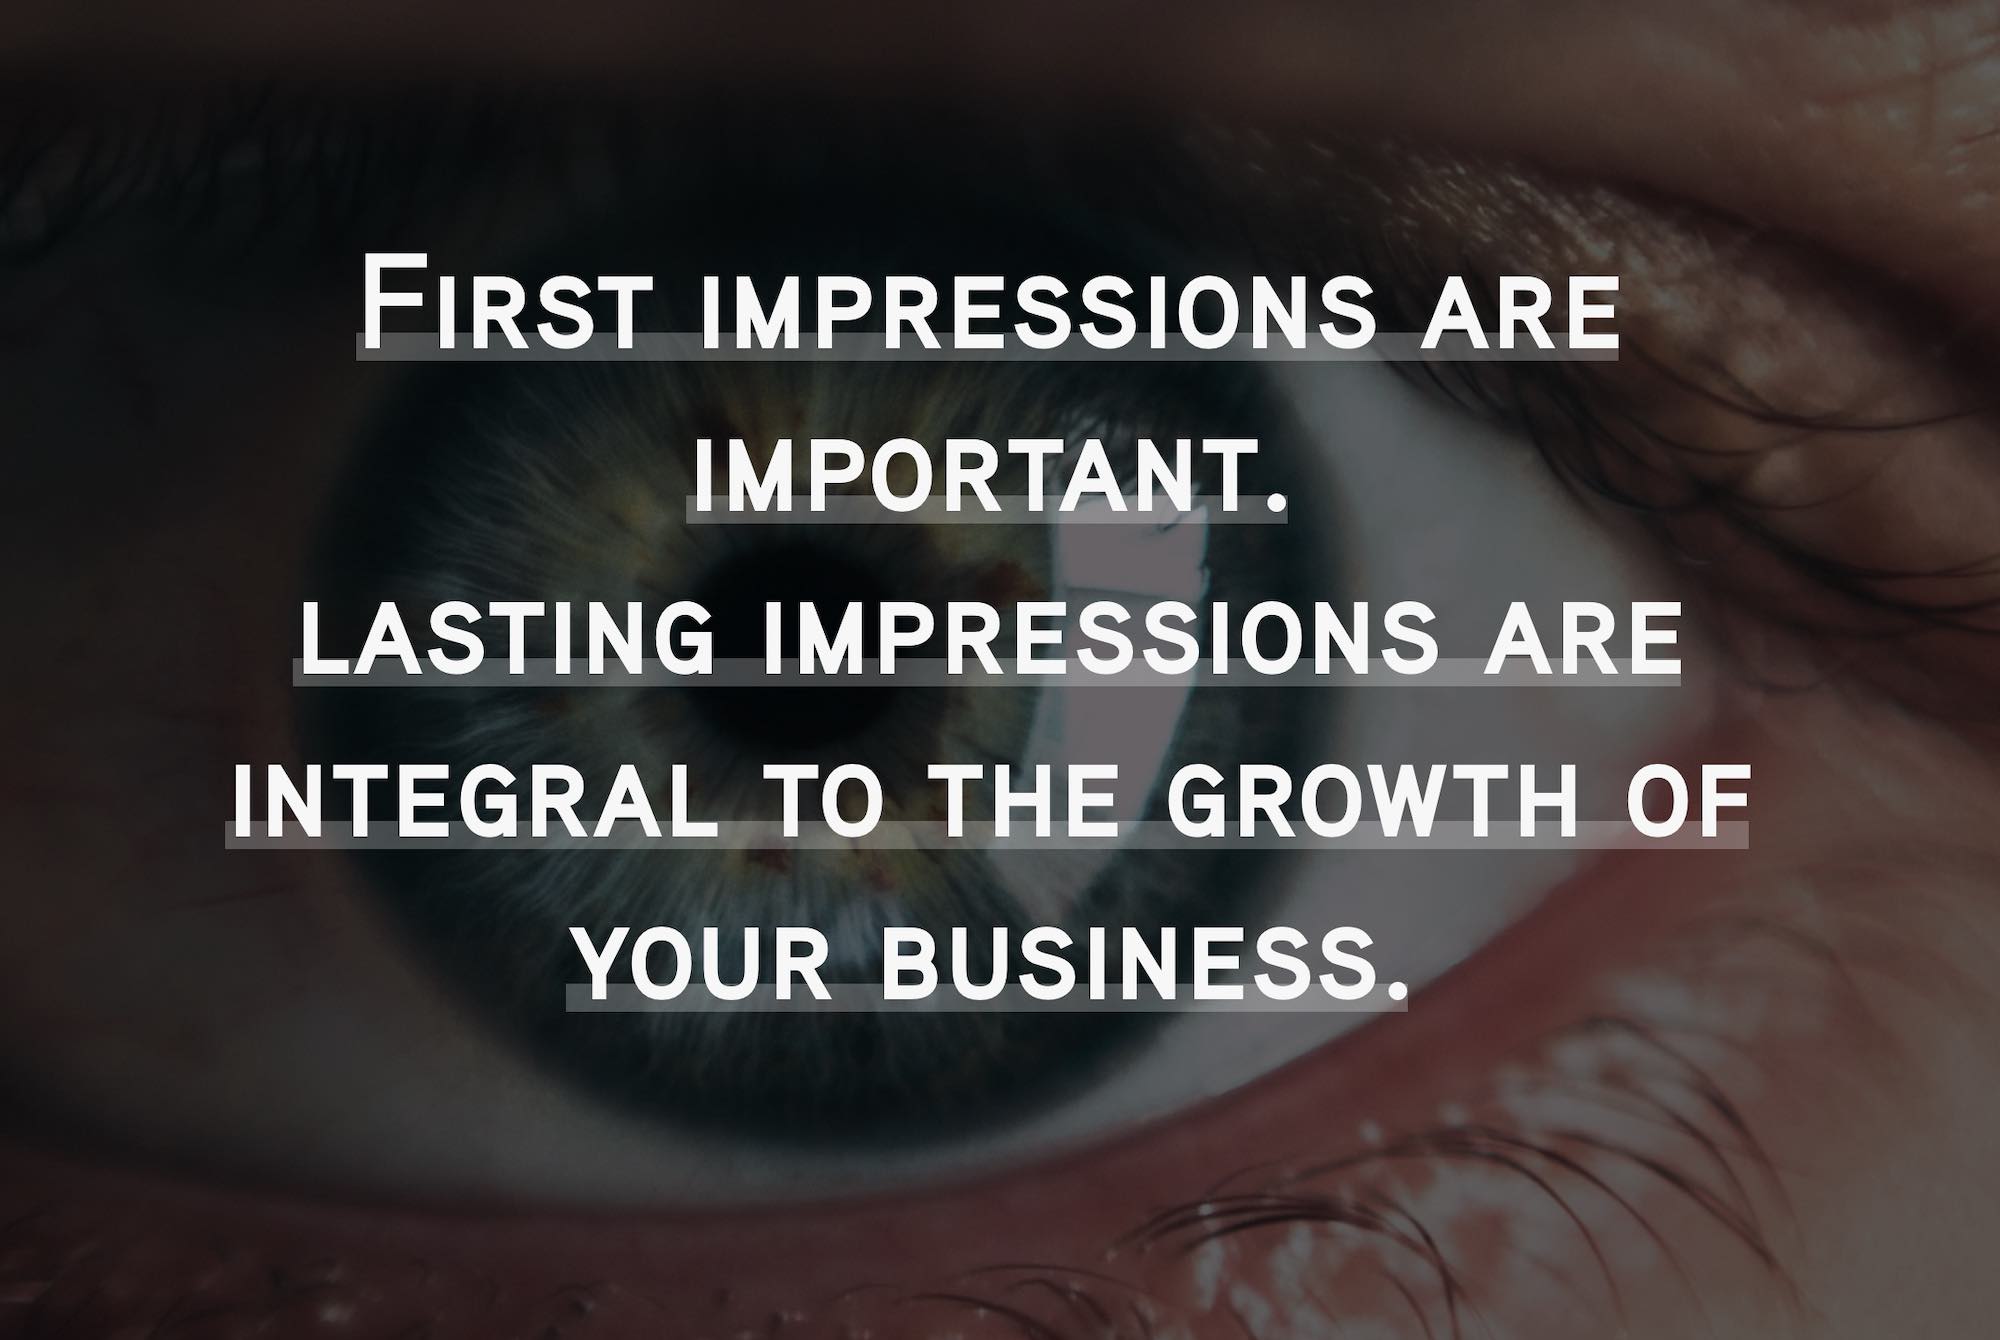 How many more sales can your business gain when your brand creates a longer lasting impression 2 How many more sales can your business gain when your brand creates a longer lasting impression-2